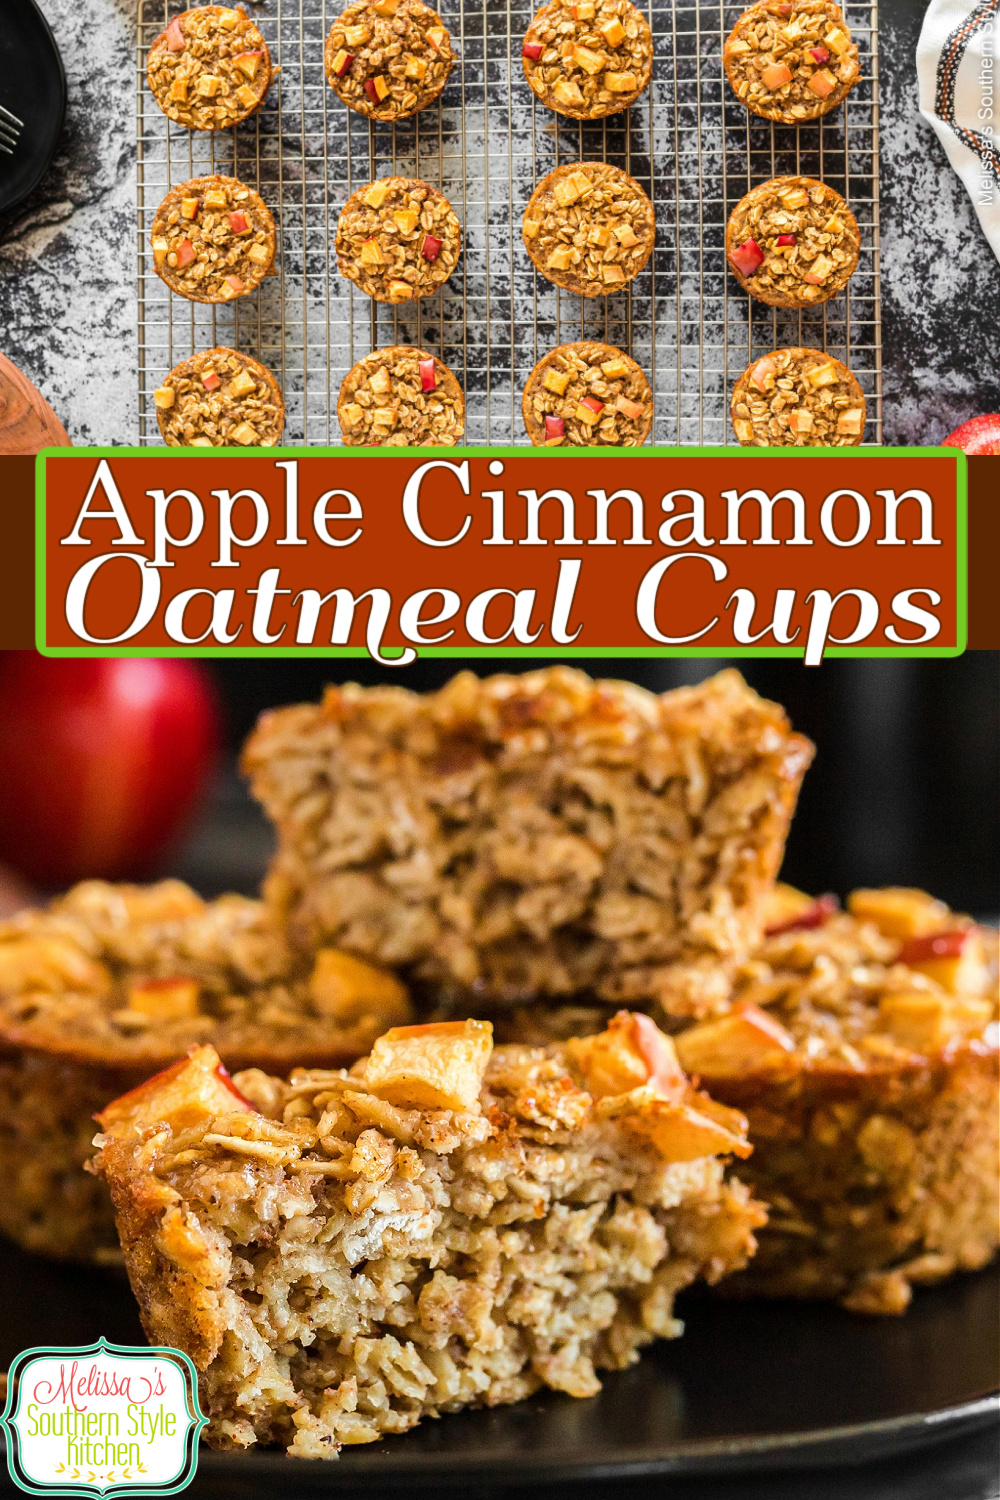 Bakr a batch of these Apple Cinnamon Baked Oatmeal Cups for single servings breakfasts and meal prep #oatmealcups #applecinnamonoatmeal #oatmealrecipes #bakedoatmeal #oatmeal #oatmealmuffins #apples #fallbaking # via @melissasssk